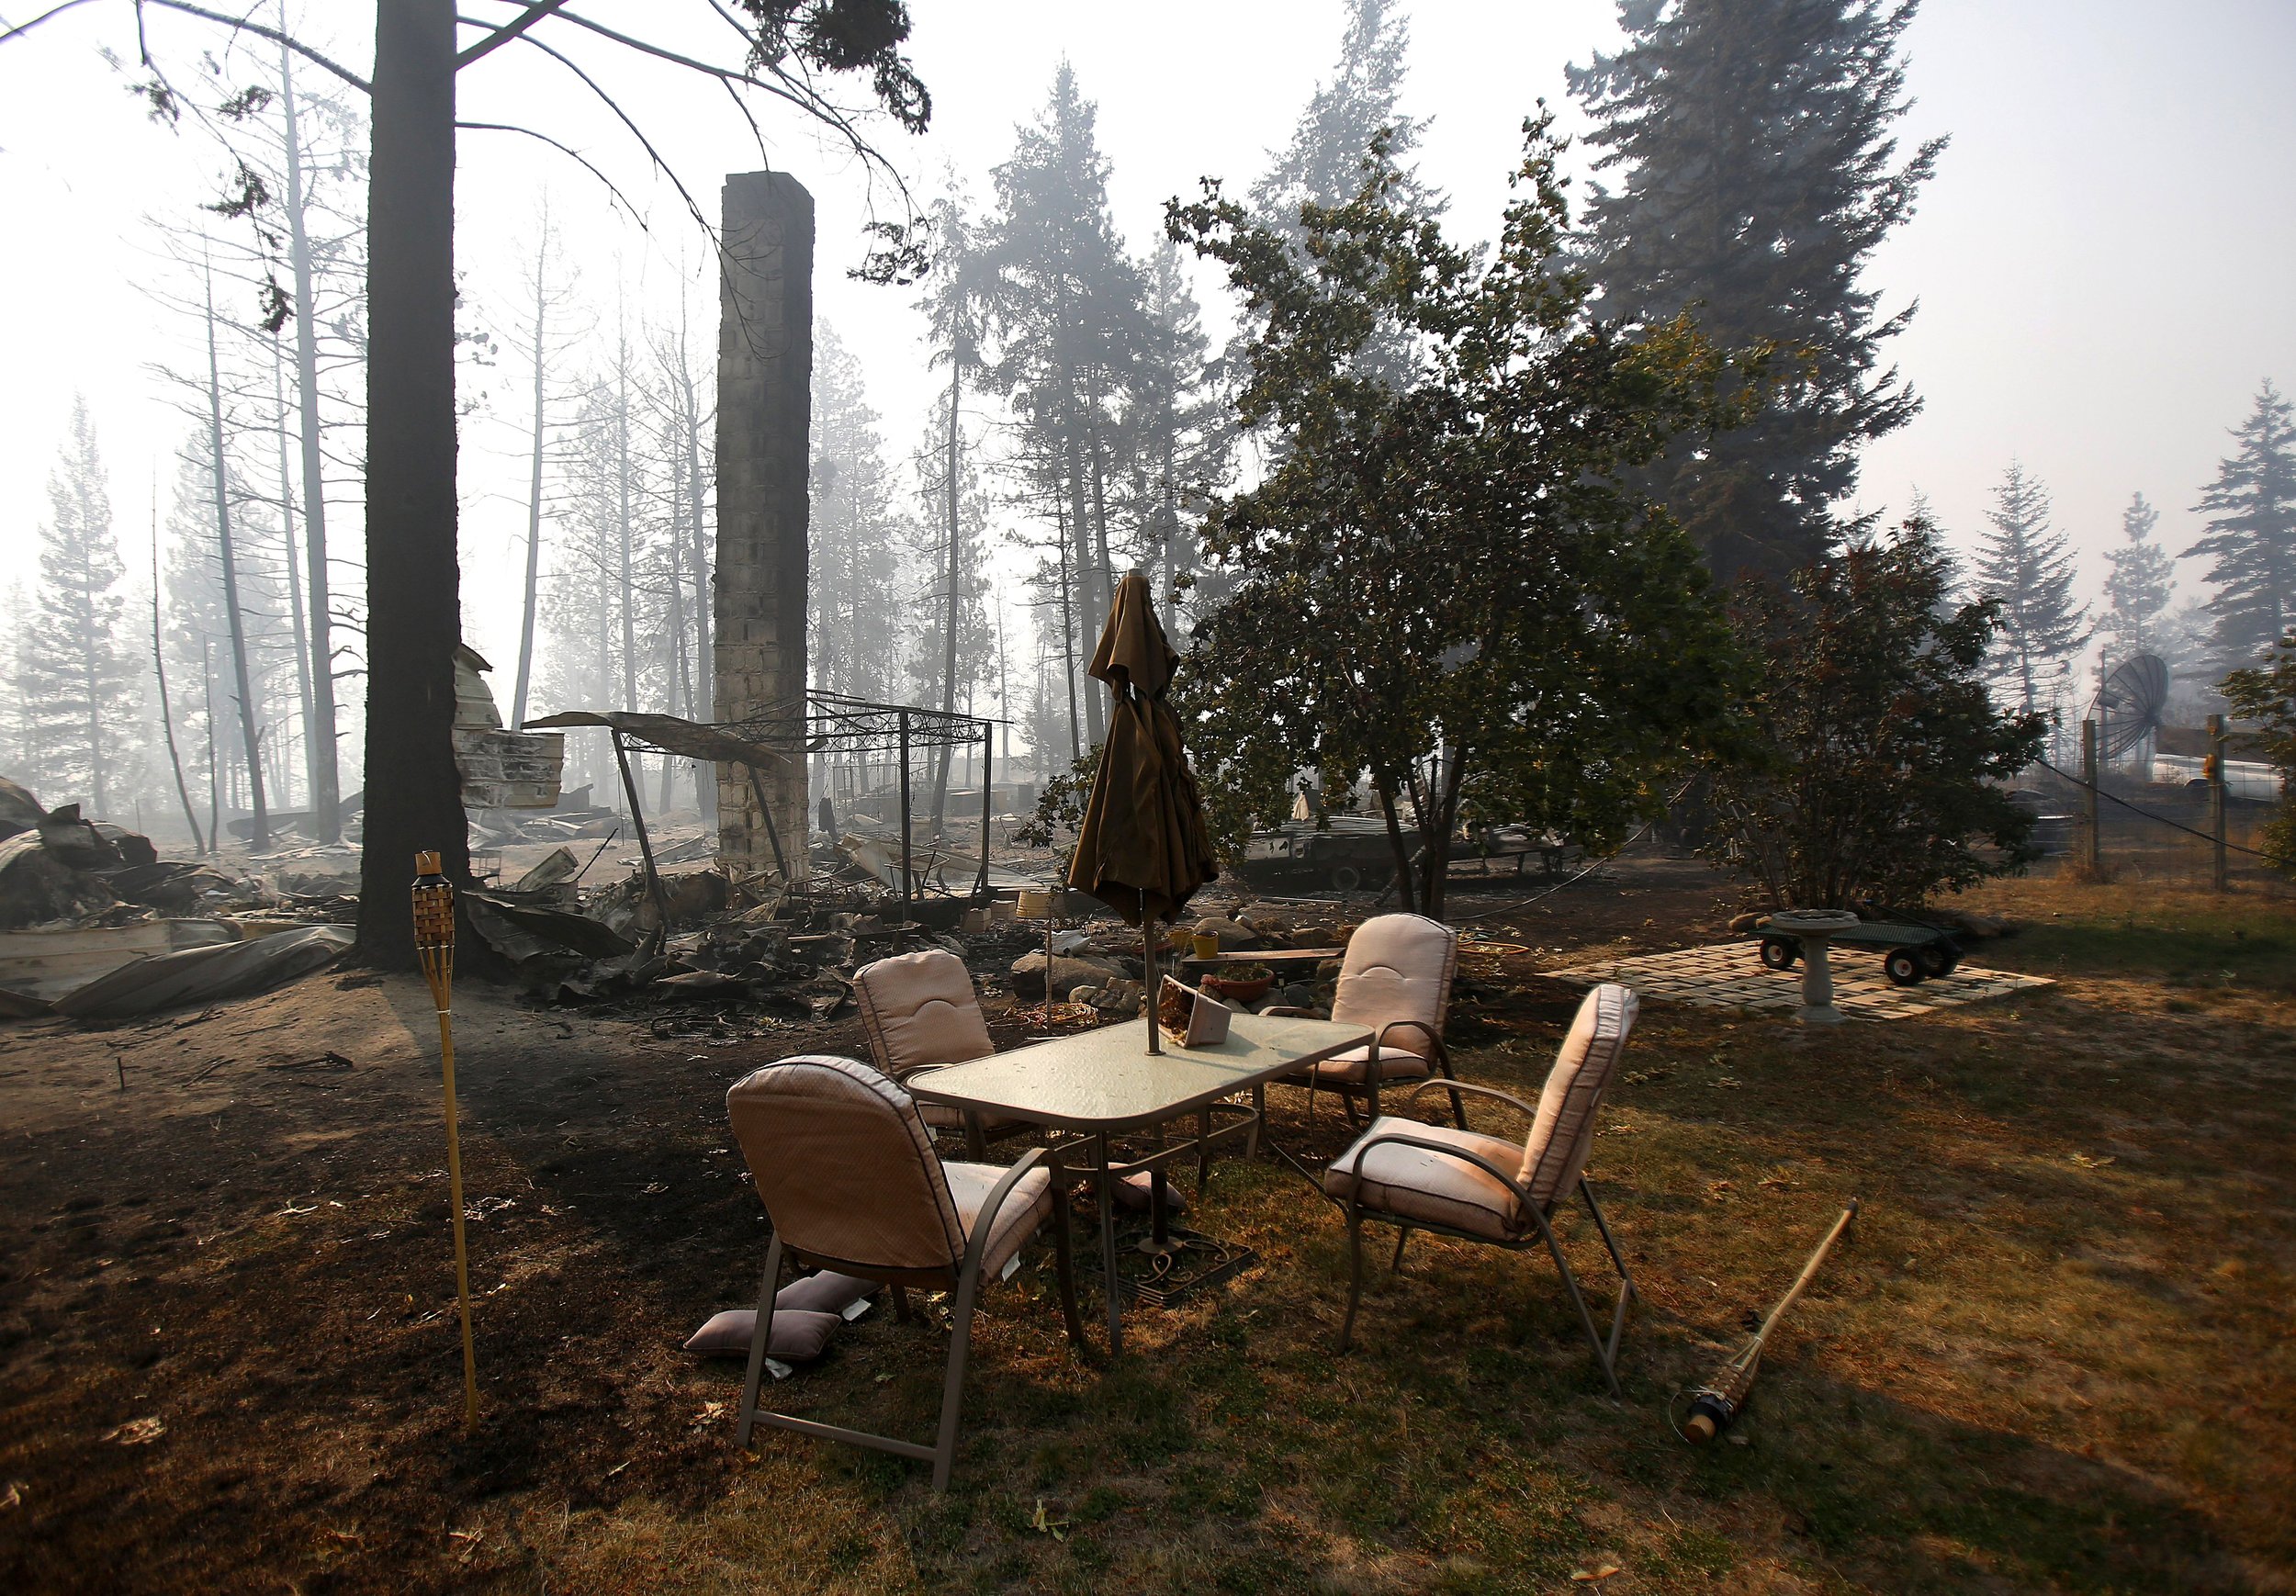  Patio furniture remains relatively untouched after a wildfire swept through the community on White Rock Road, destroying several houses, in Okanogan, Wash., Sunday, Aug. 23, 2015. 